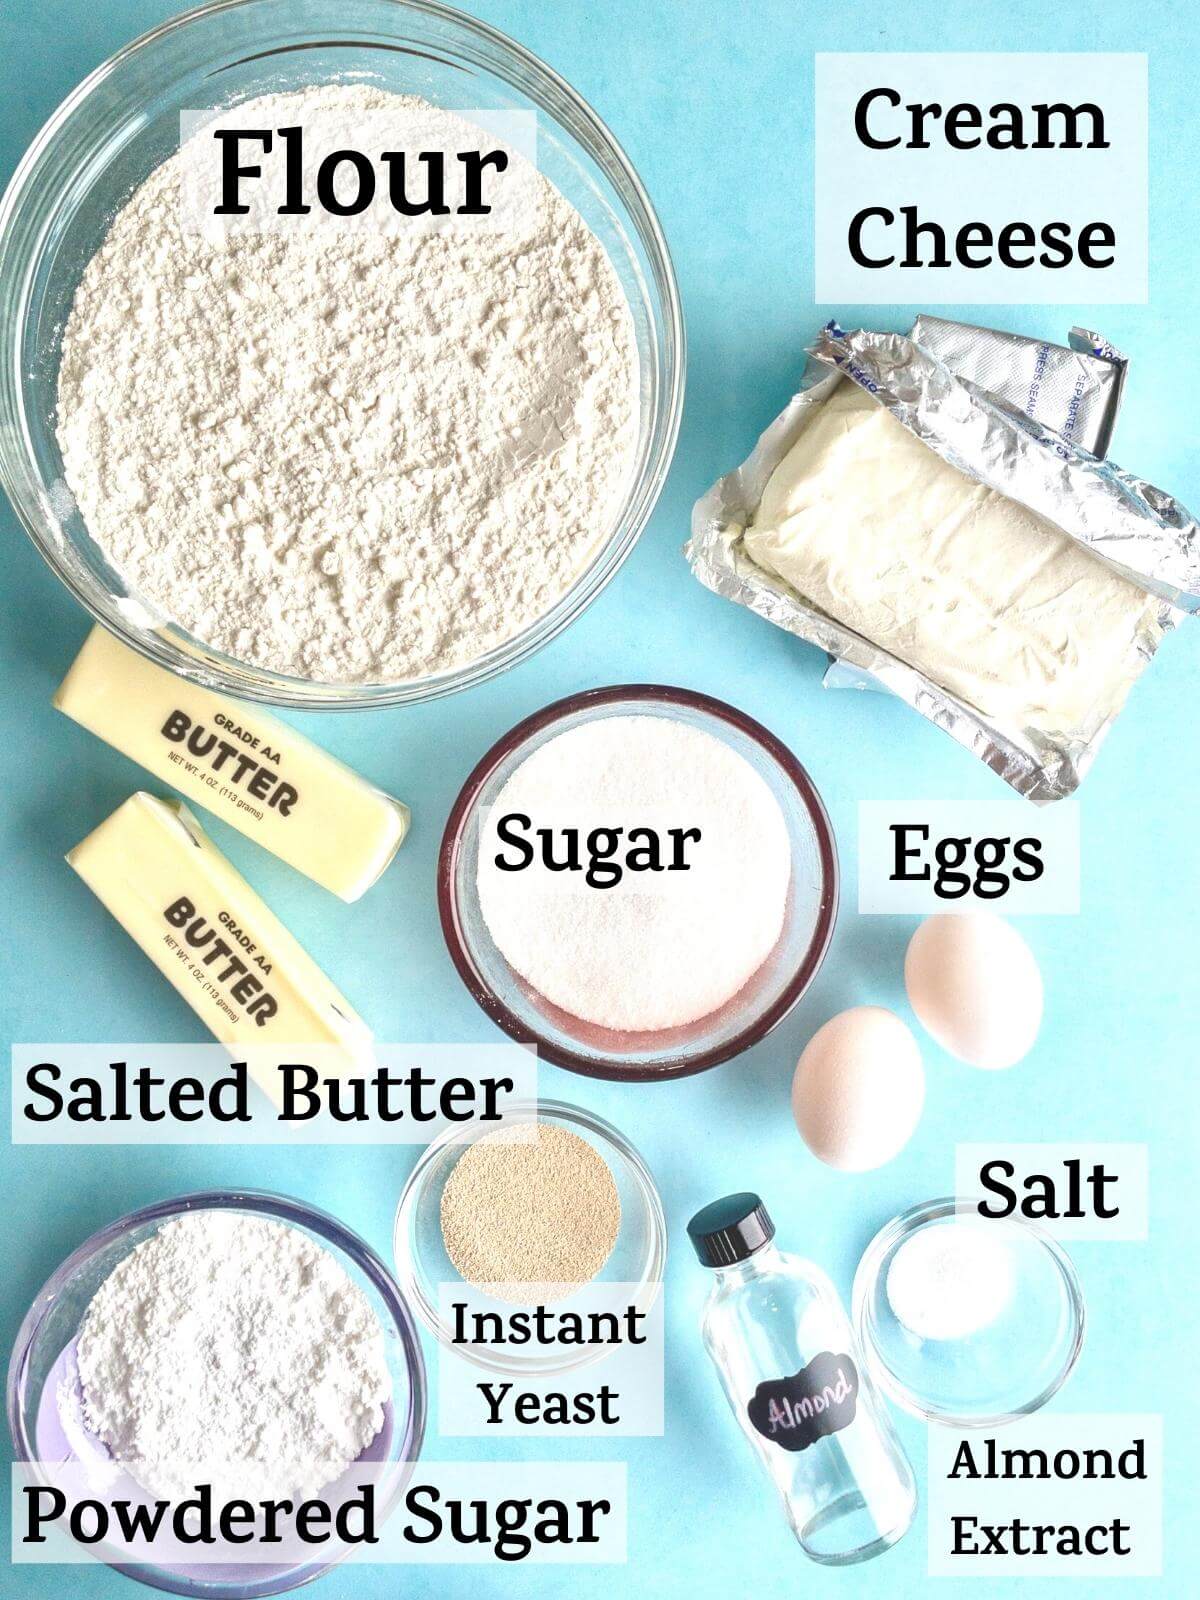 An overhead shot of cream cheese danish ingredients with the following text: flour, sugar, salted butter, eggs, salt, instant yeast, cream cheese, powdered sugar, almond extract.